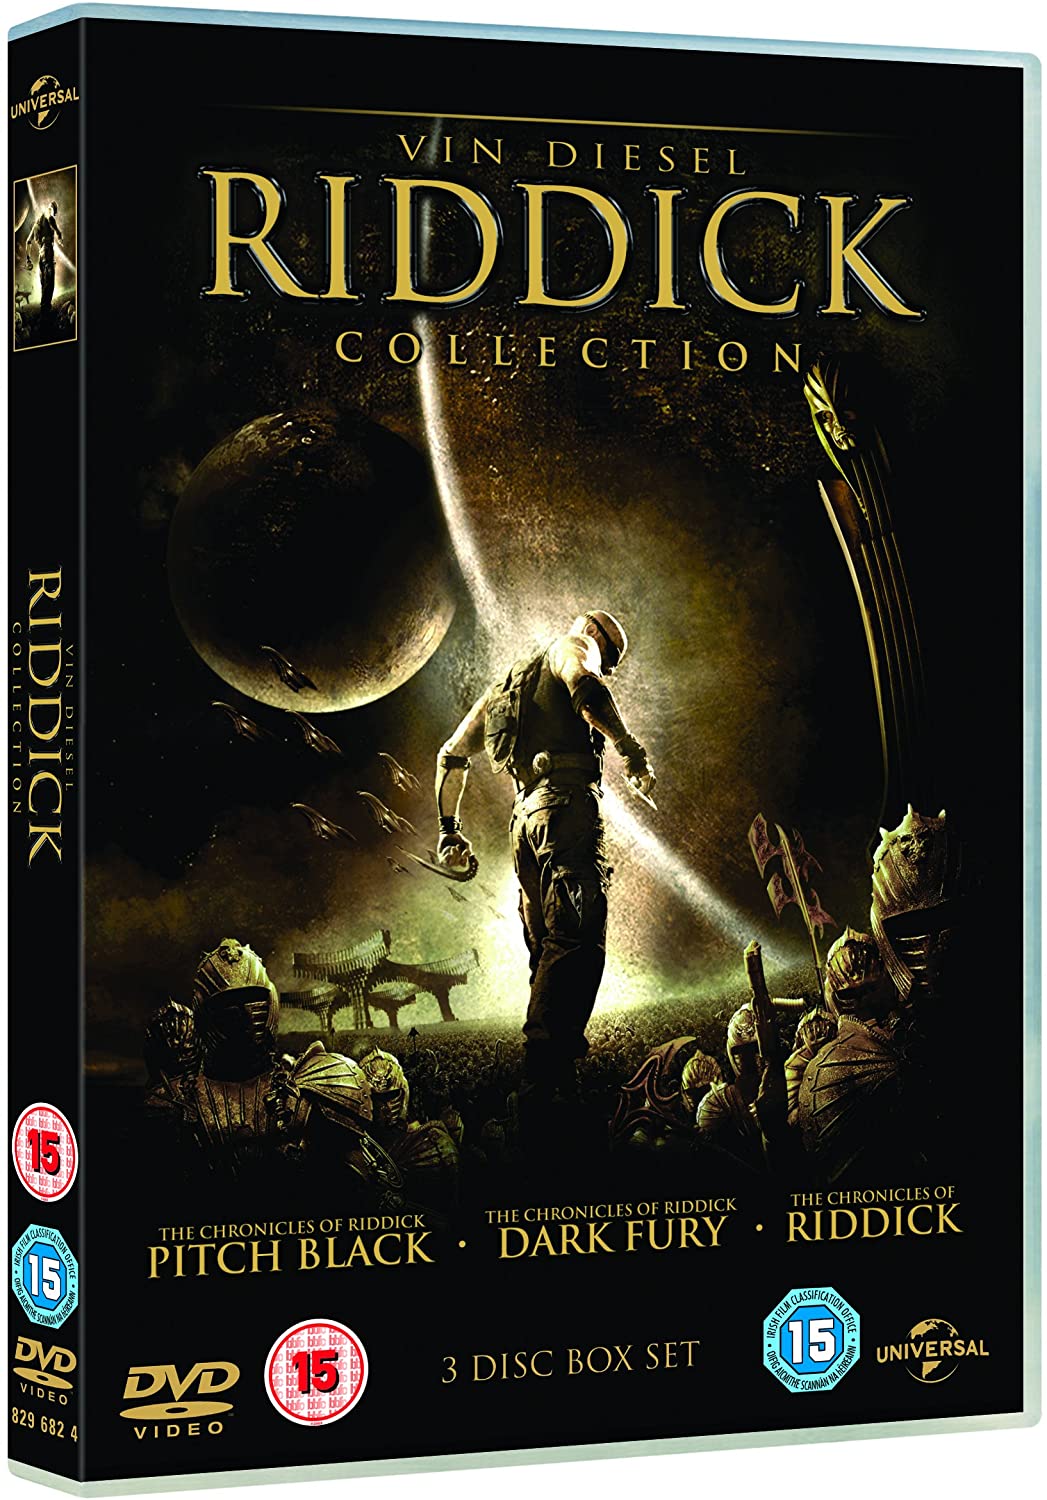 The Riddick 3 Film Collection (DVD)